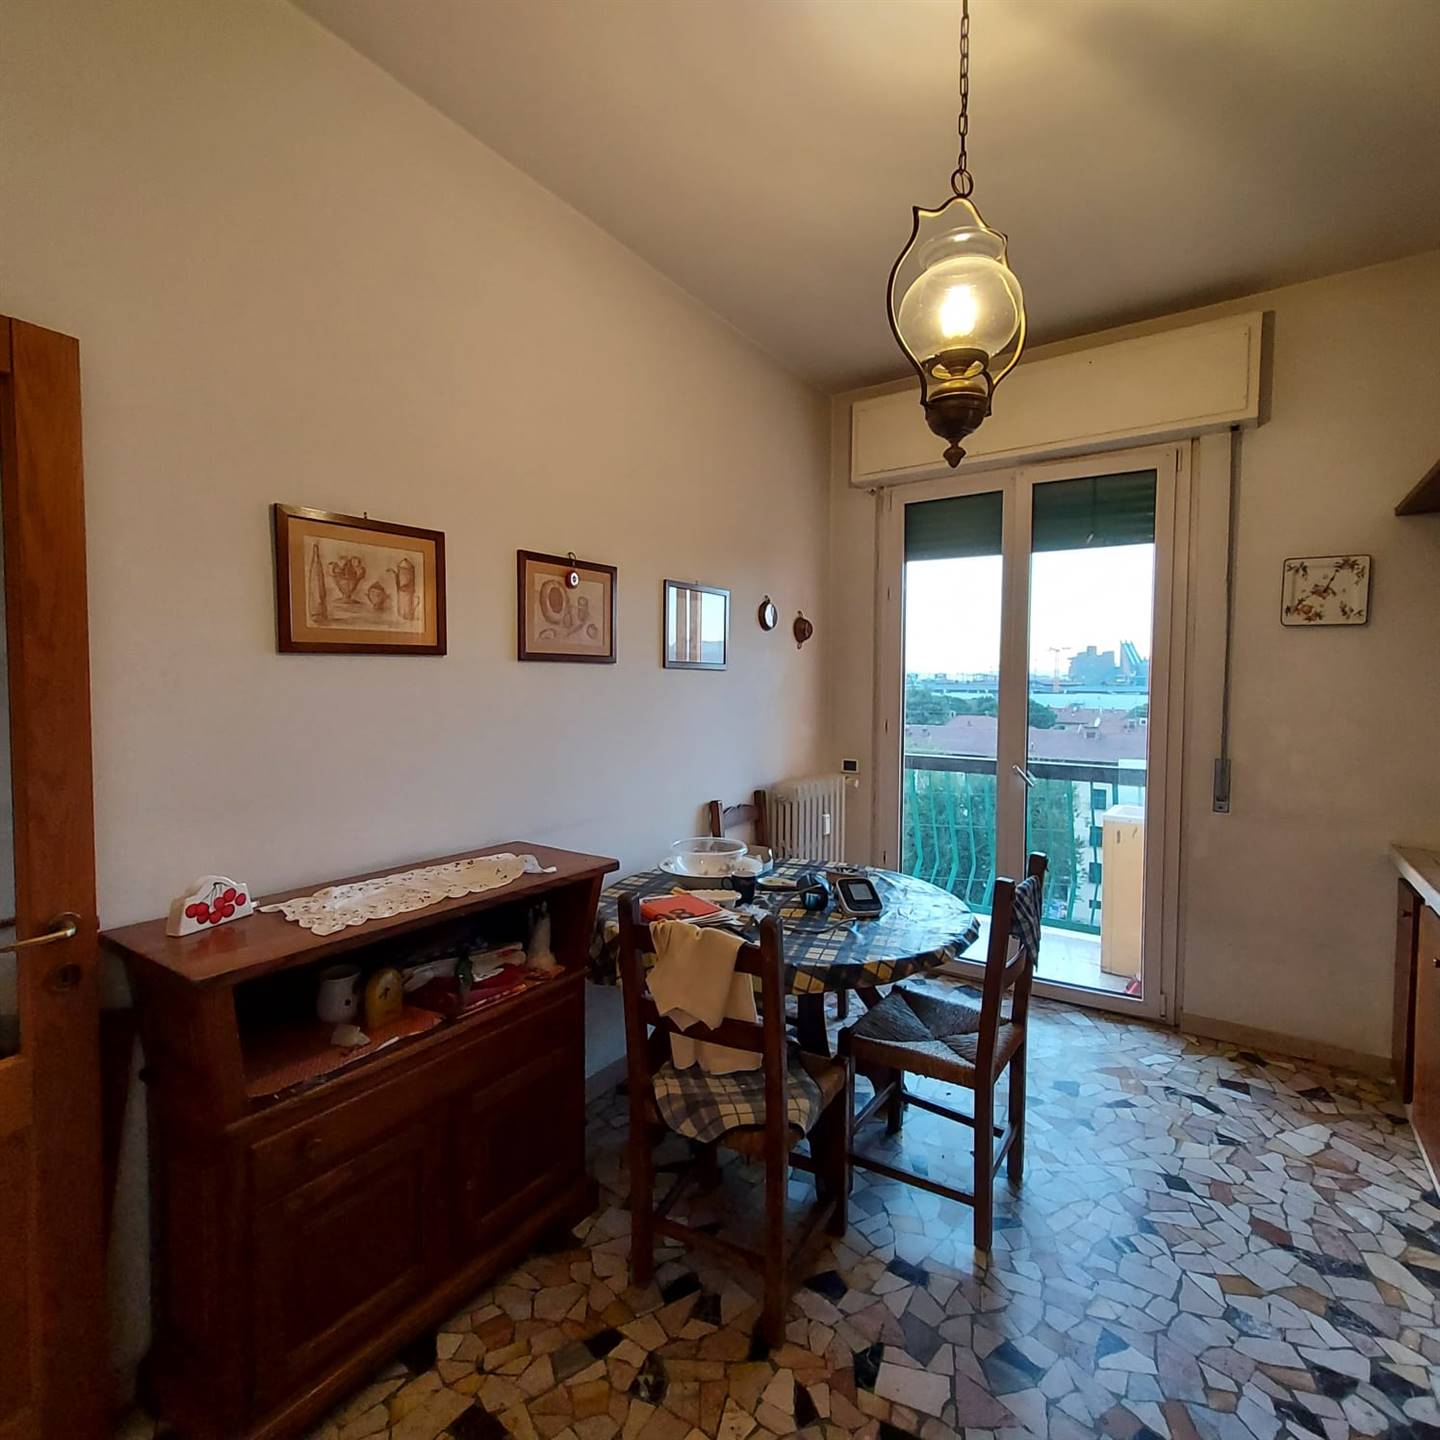 CIRCONDARIA, FIRENZE, Apartment for sale of 80 Sq. mt., Excellent Condition, Heating Centralized, Energetic class: F, Epi: 202,28 kwh/m2 year, placed 